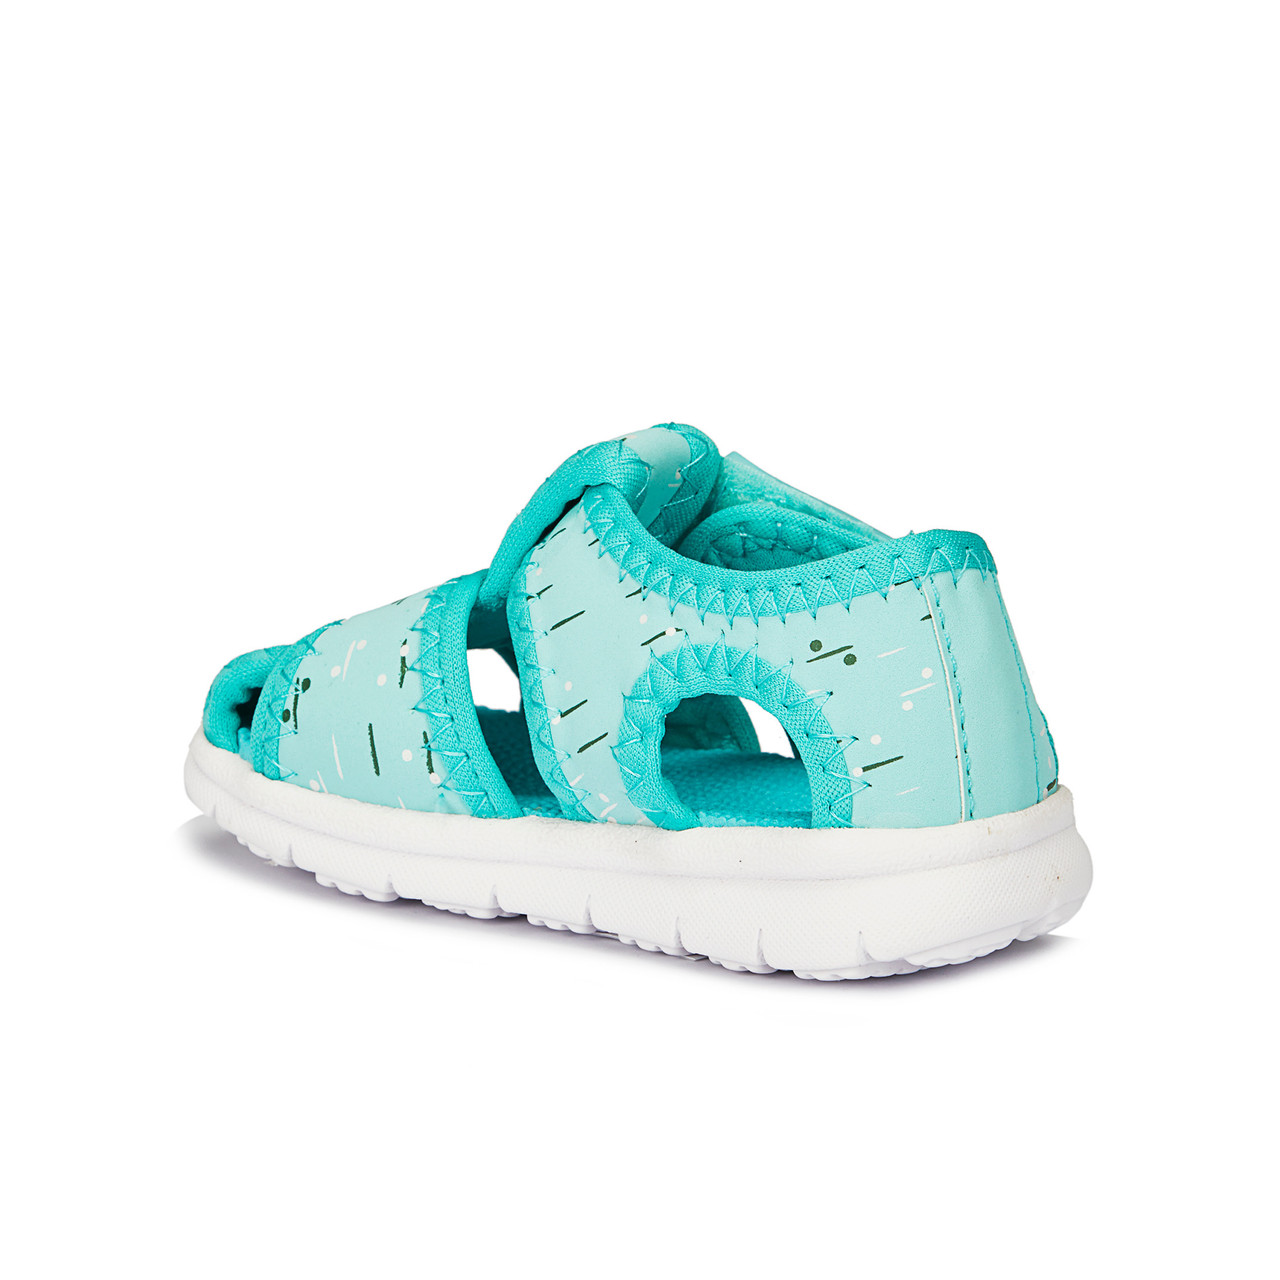 Bumba Green sandals for babies and kids